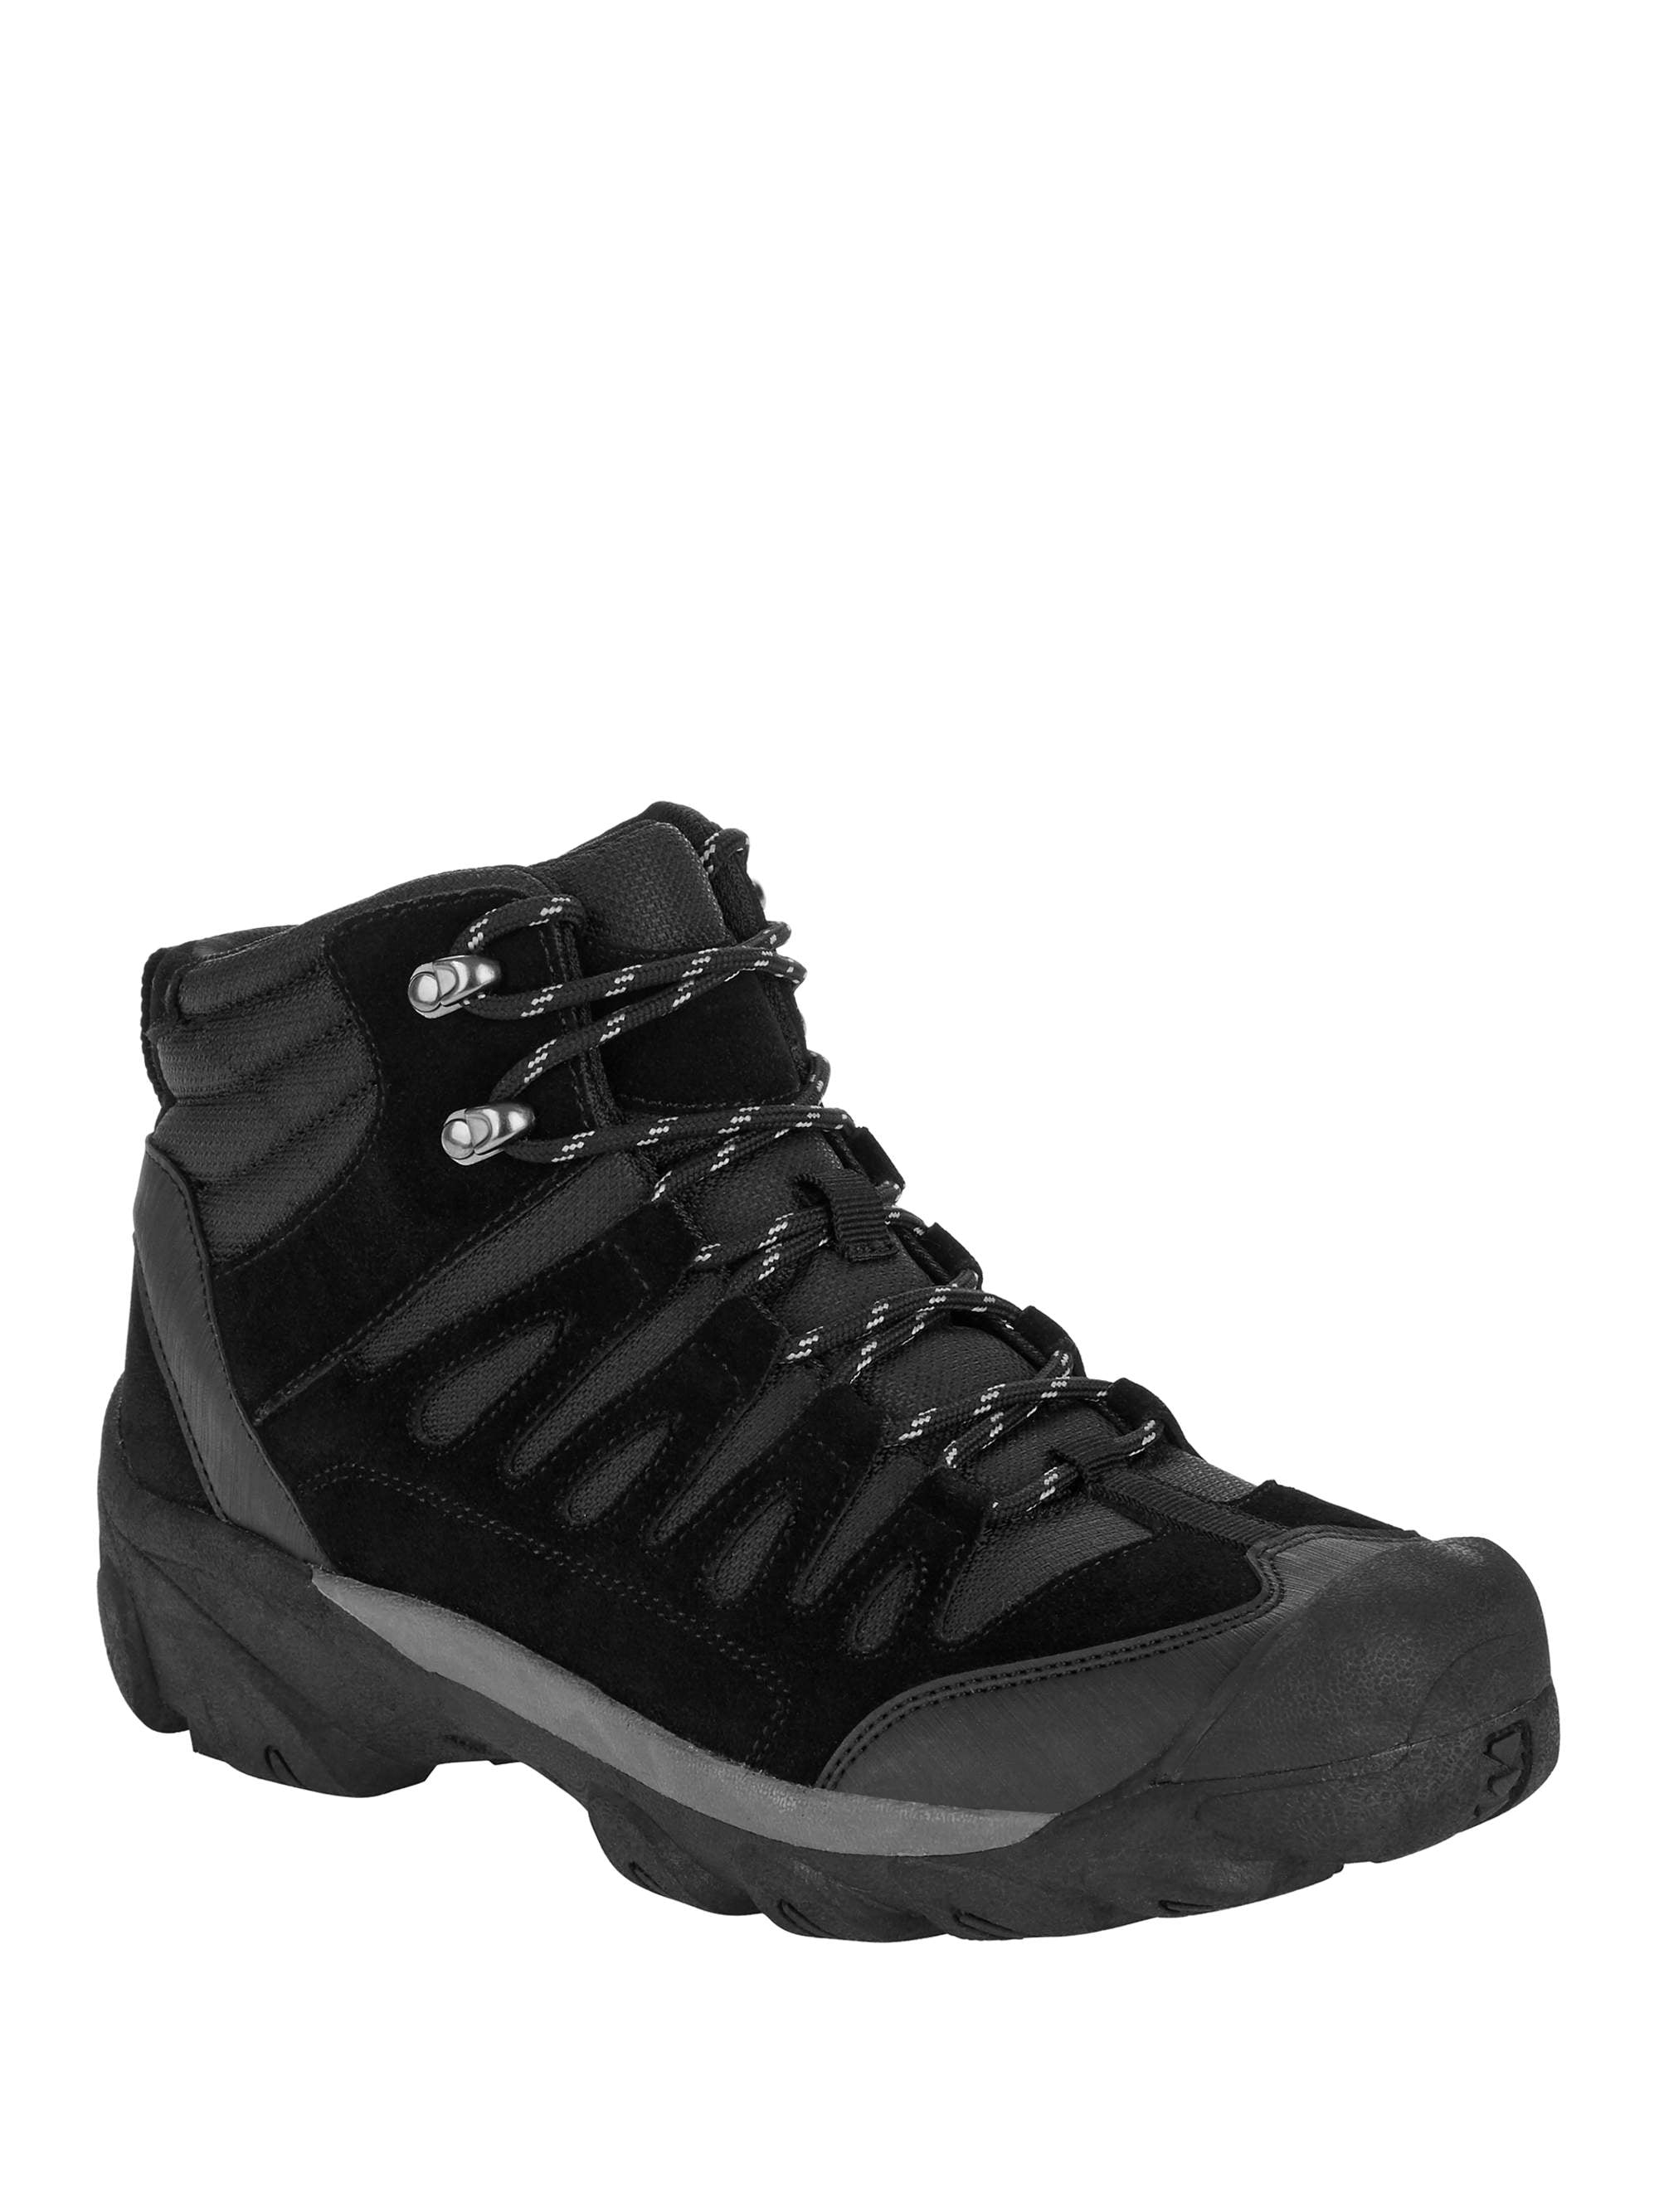 black leather hiking shoes